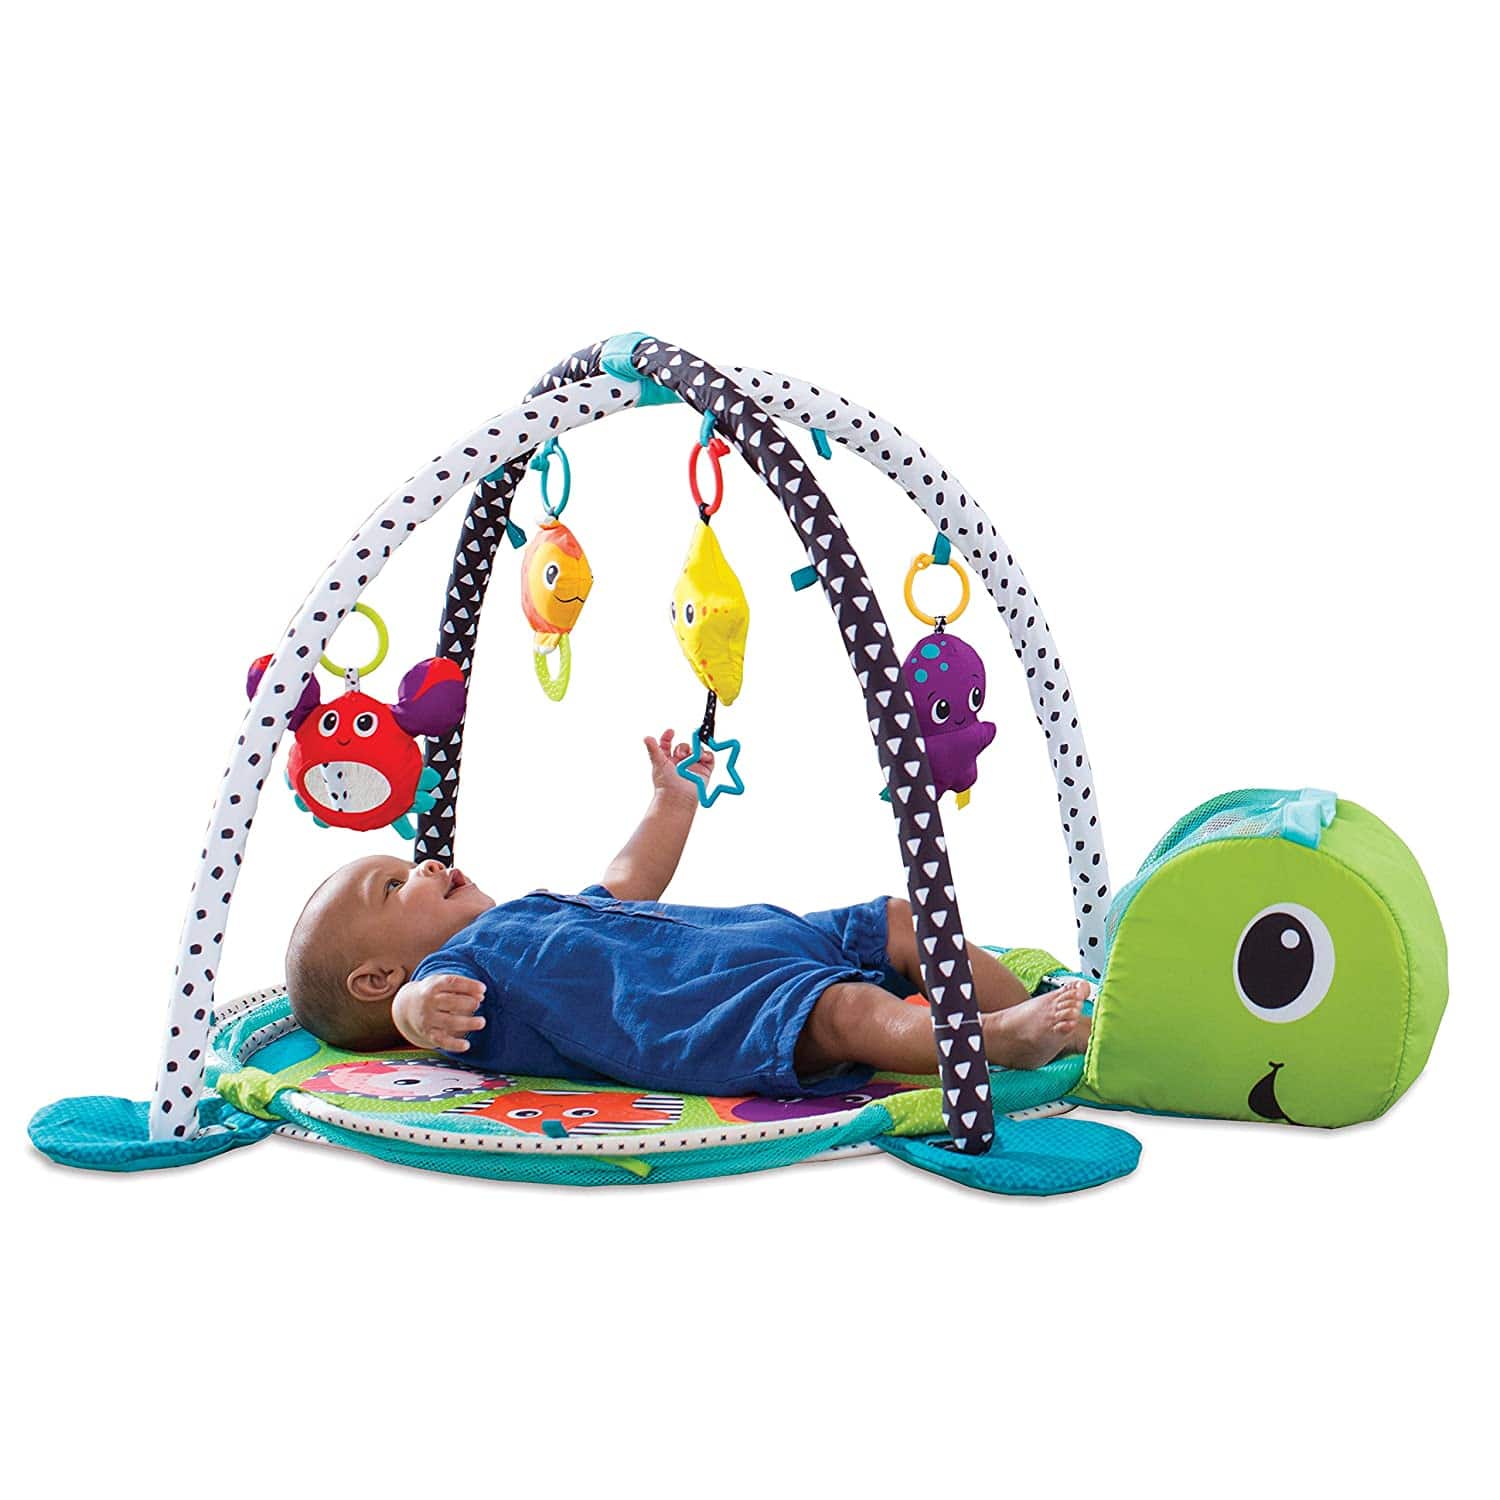 Little Angel 3in1 Baby Activity gym with ball pit Hippo